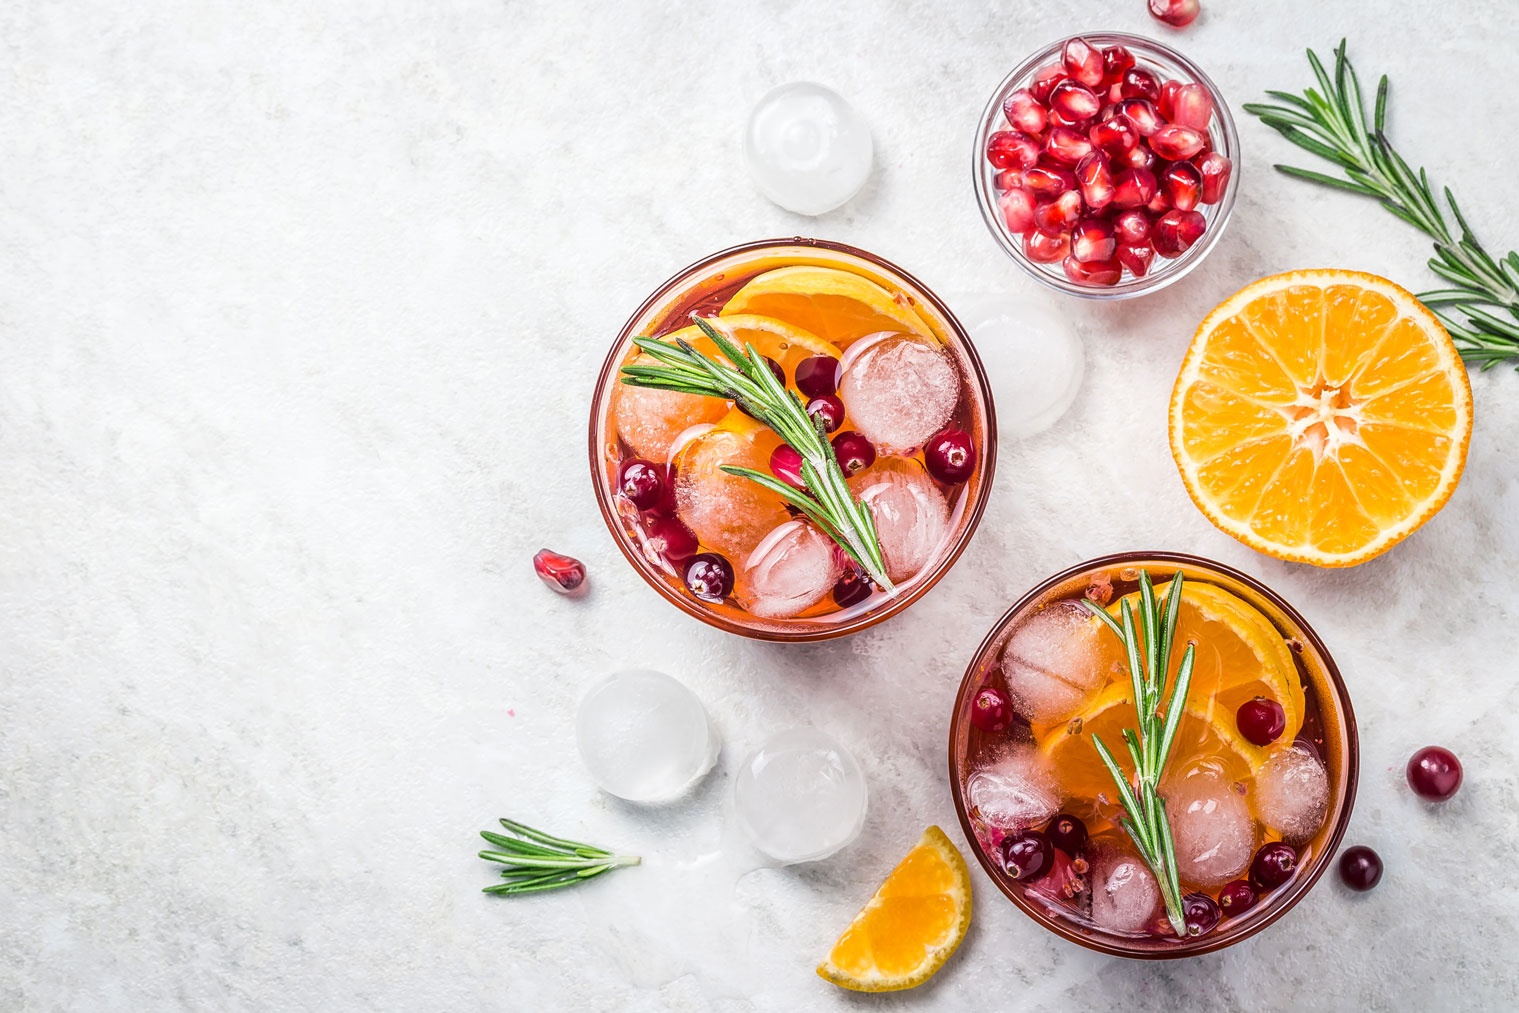 Two holiday-inspired cocktails with pomegranate arils and a sliced orange.